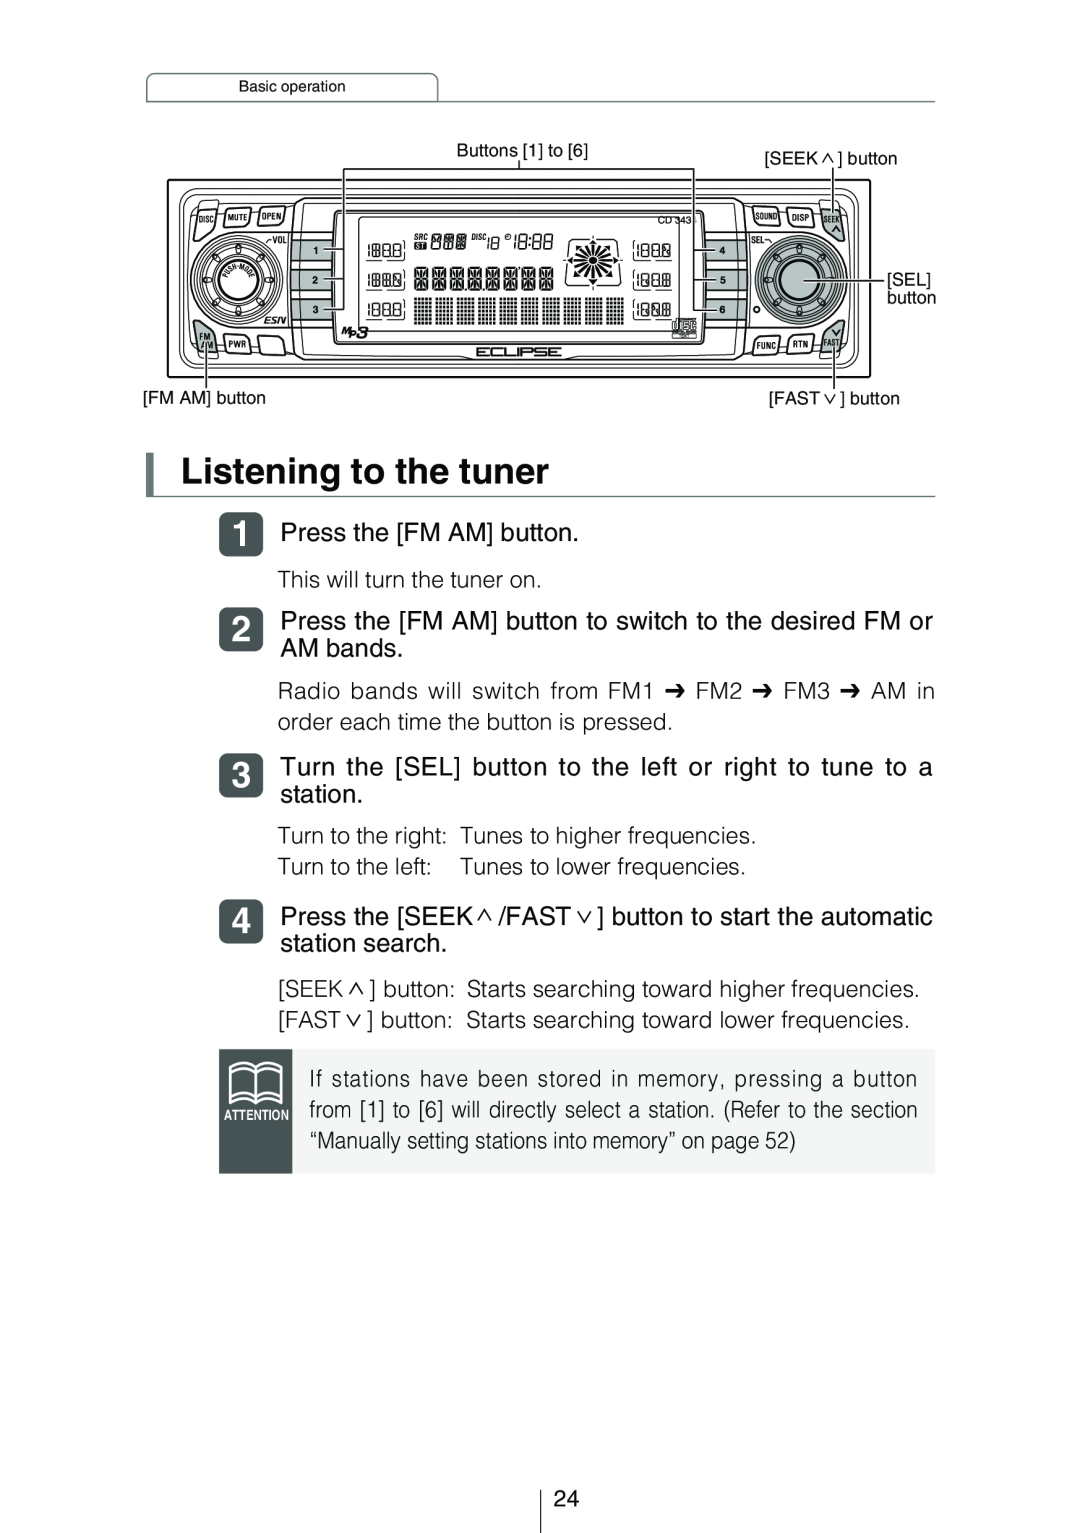 Eclipse - Fujitsu Ten CD3434 owner manual Listening to the tuner, Press the FM AM button, AM bands, station 